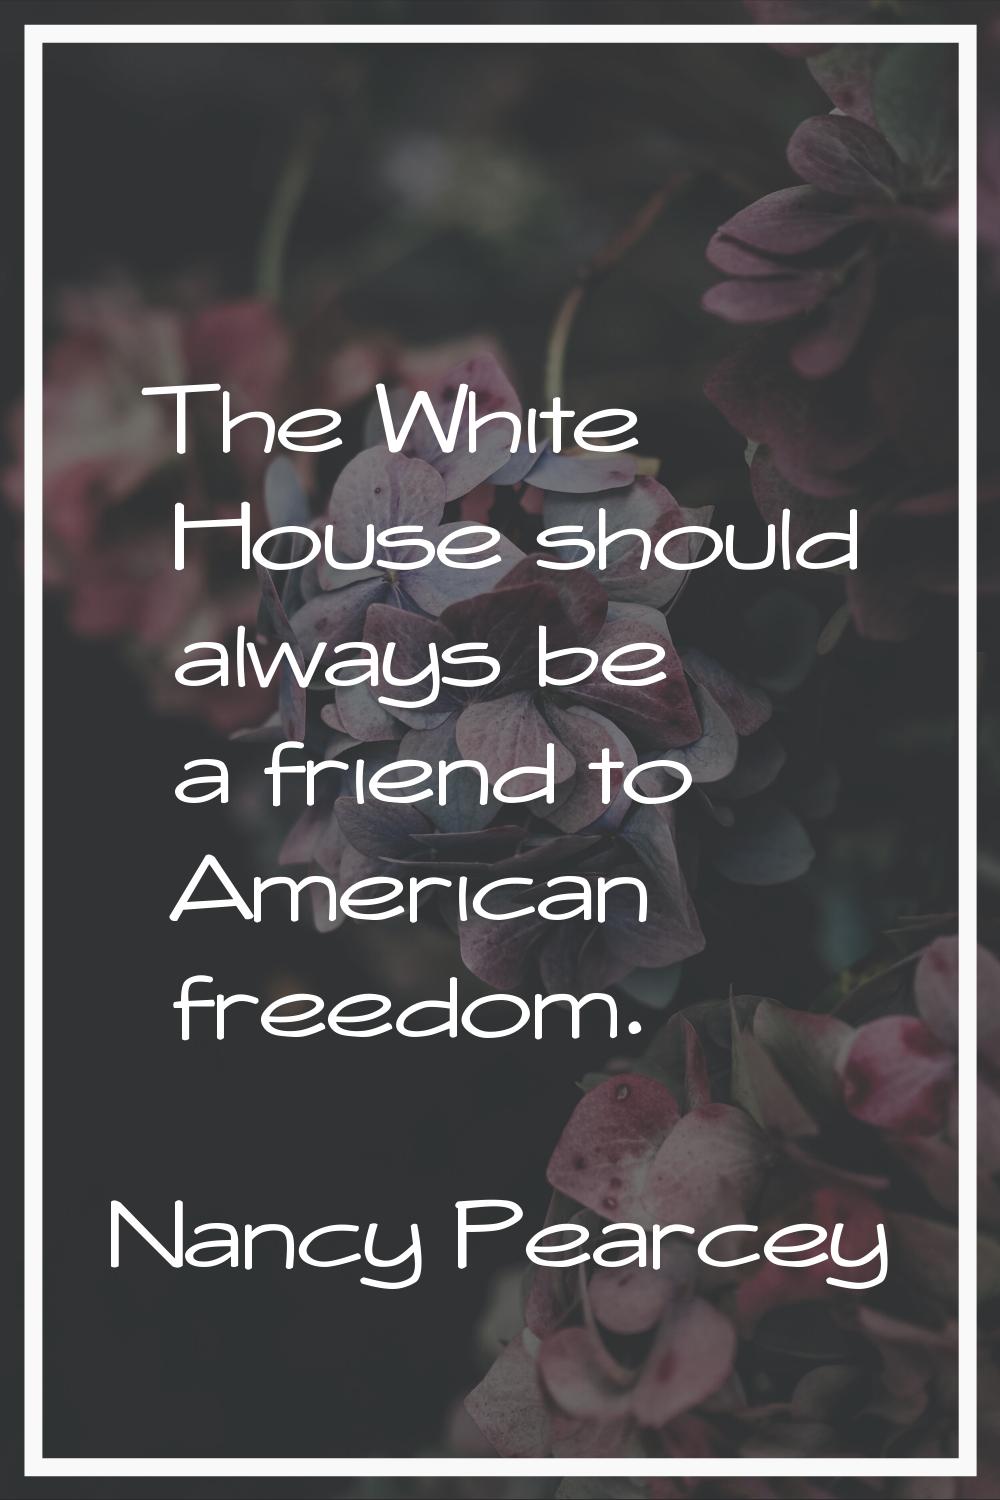 The White House should always be a friend to American freedom.